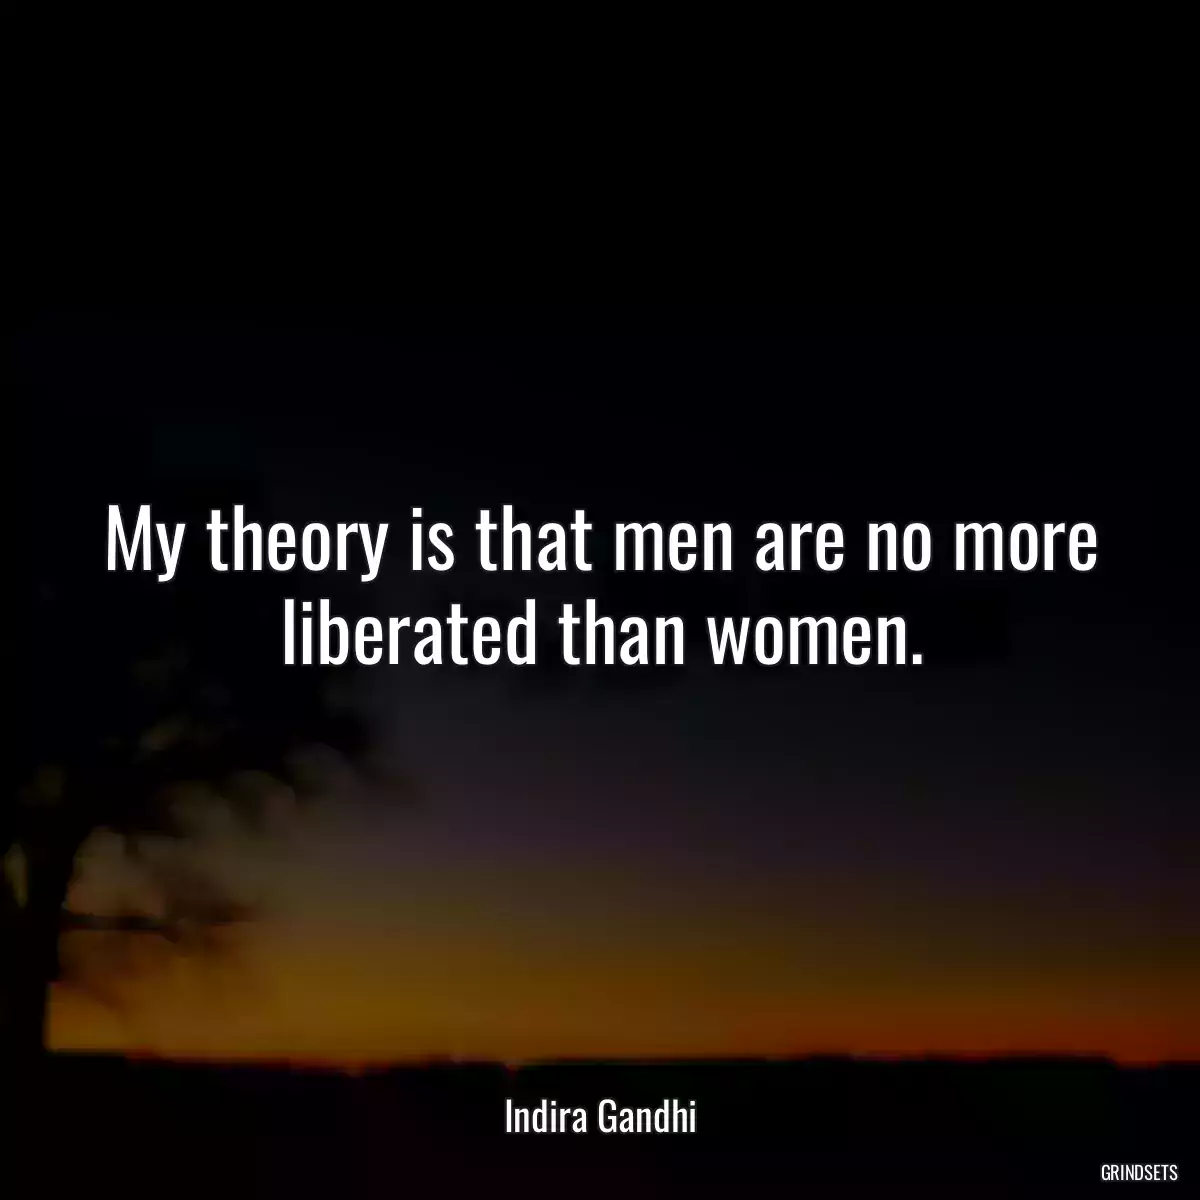 My theory is that men are no more liberated than women.